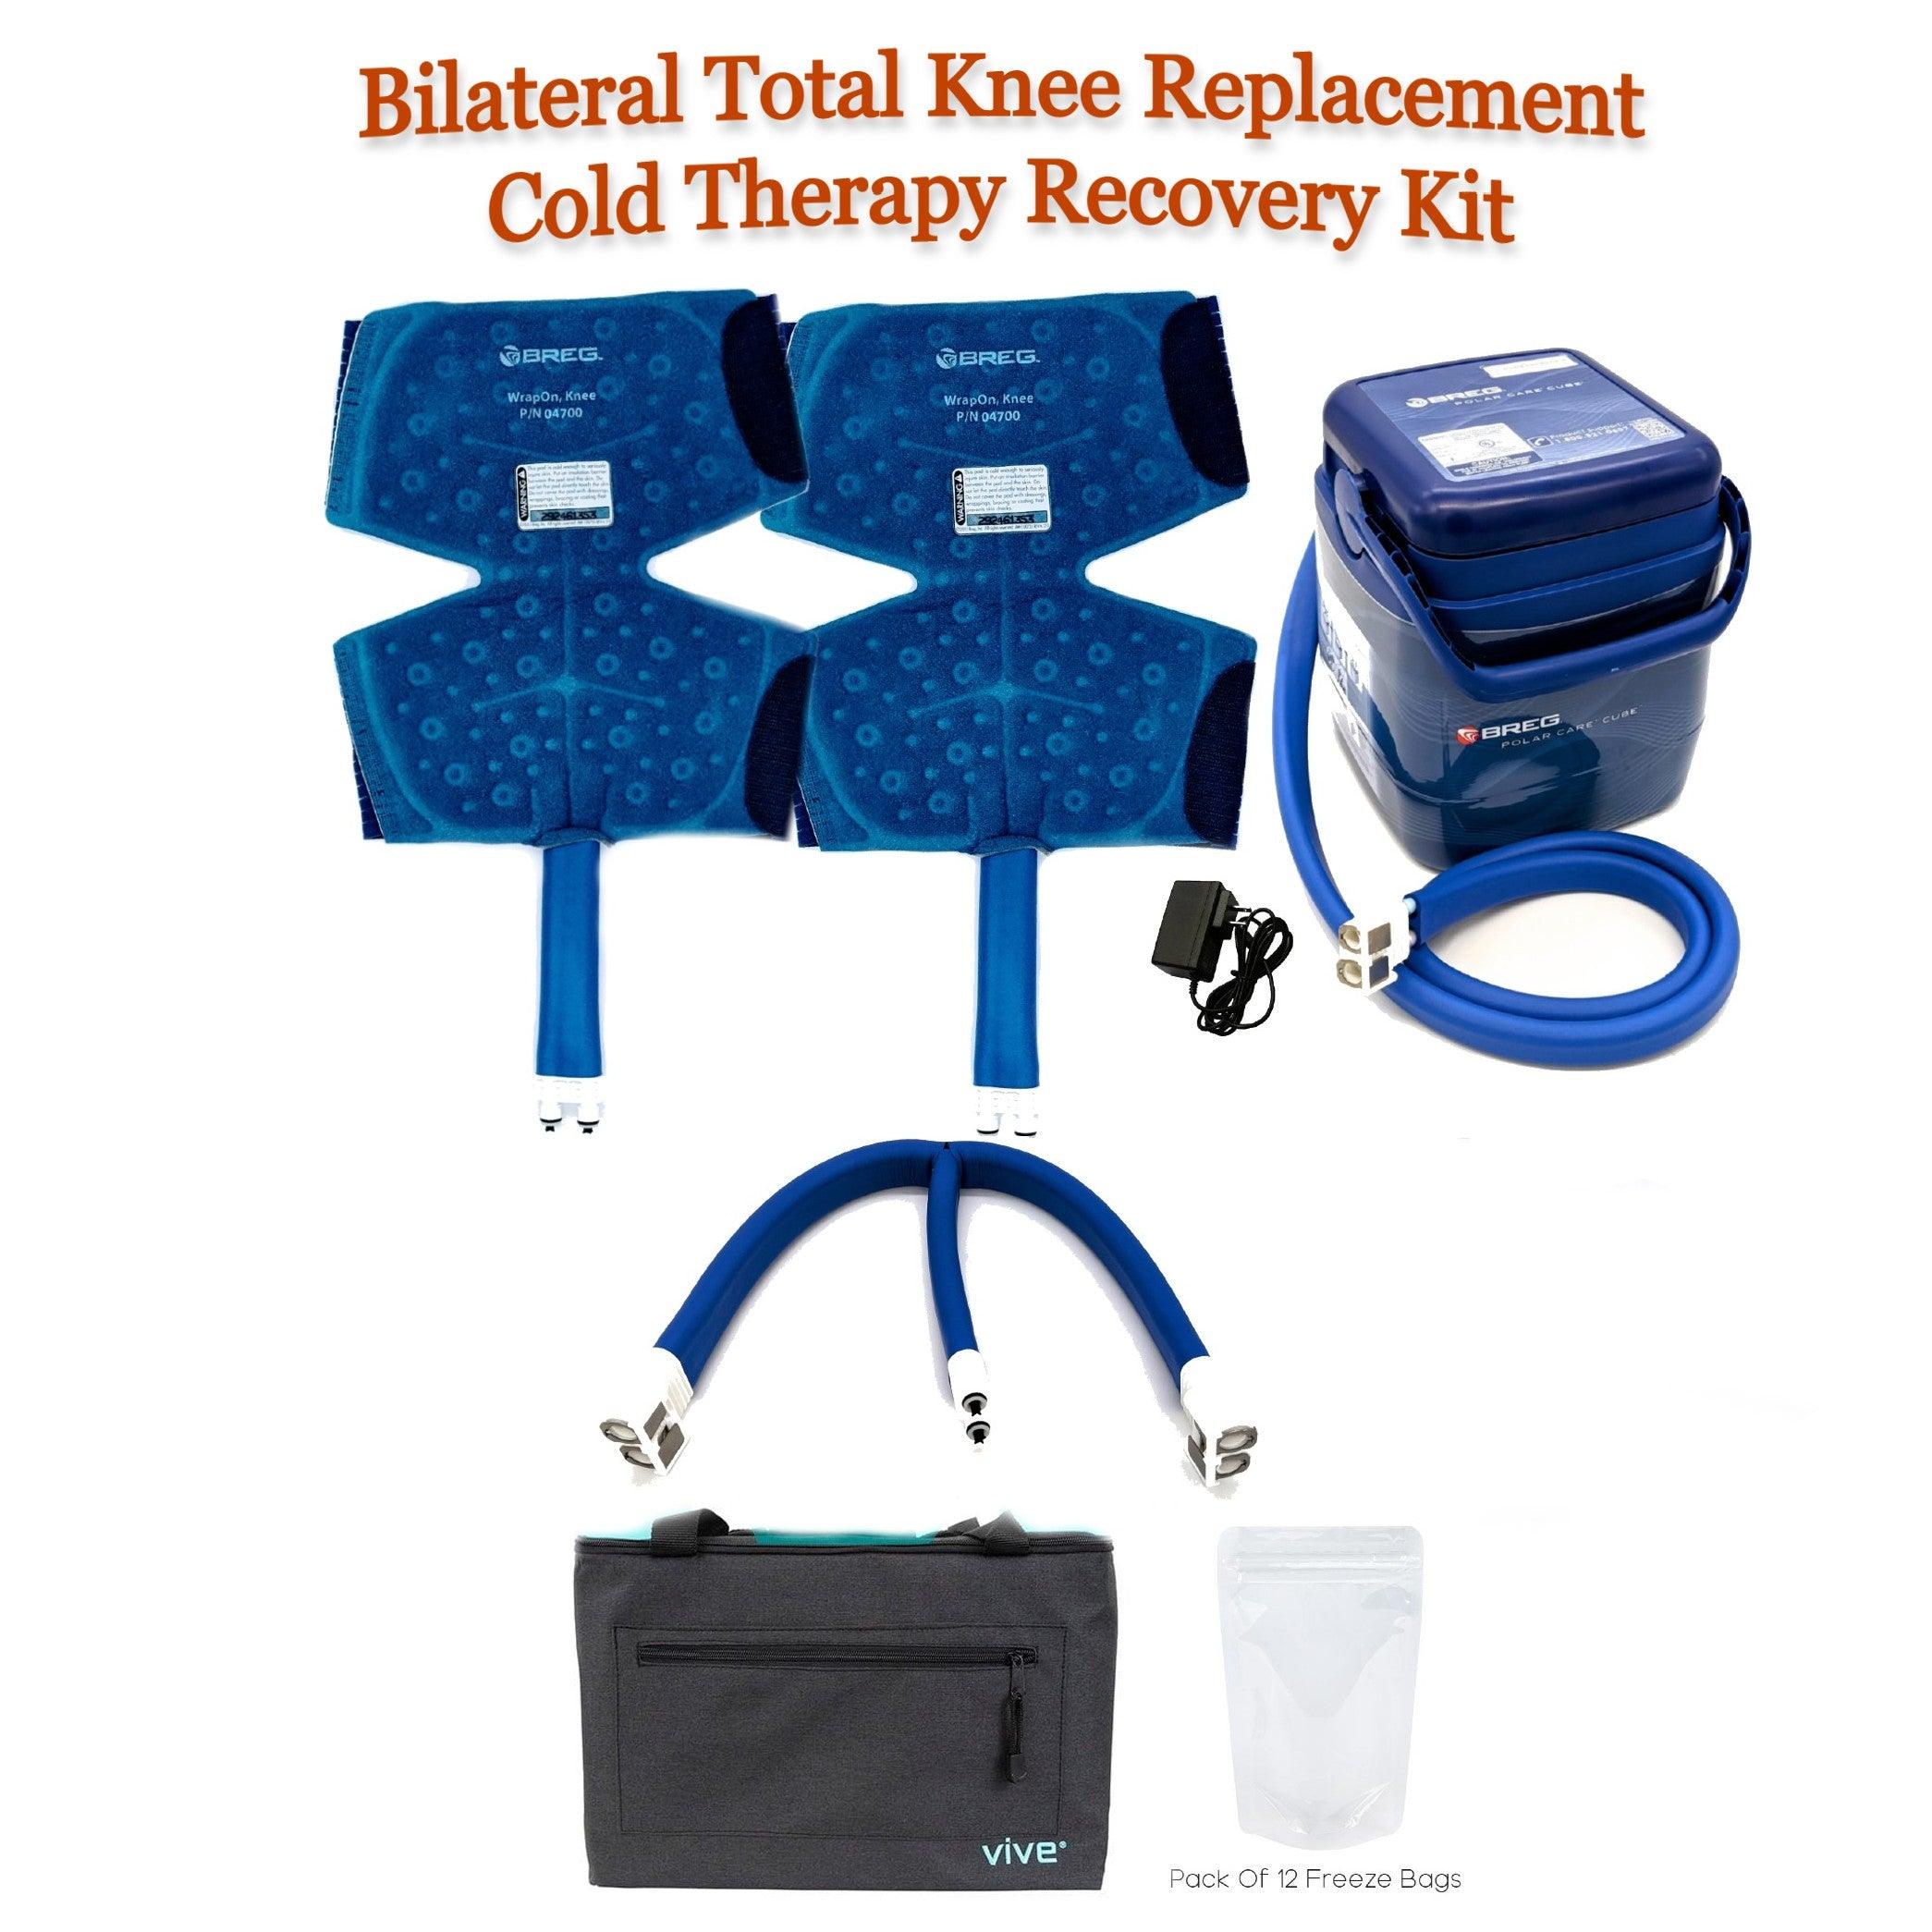 Bilateral Total Knee Replacement (BTKR) Cold Therapy Recovery Kit - BTKR-Combo-Kit-Med Bilateral Total Knee Replacement (BTKR) Cold Therapy Recovery Kit - undefined by Supply Physical Therapy Breg, DKR Recovery Kit, Kit